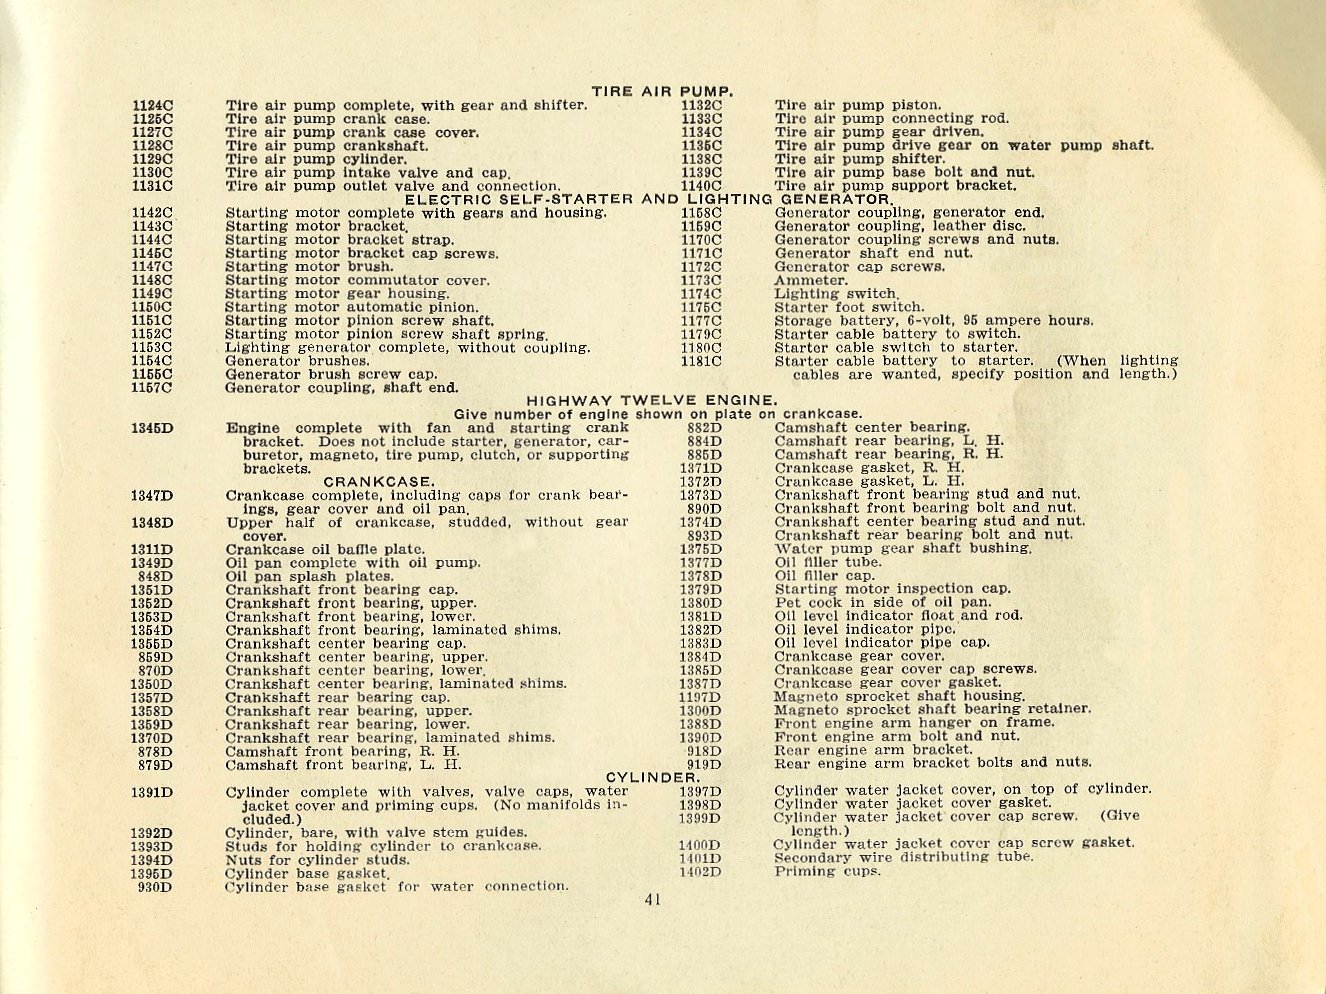 1915_National_Owners_Owners_Manual-41